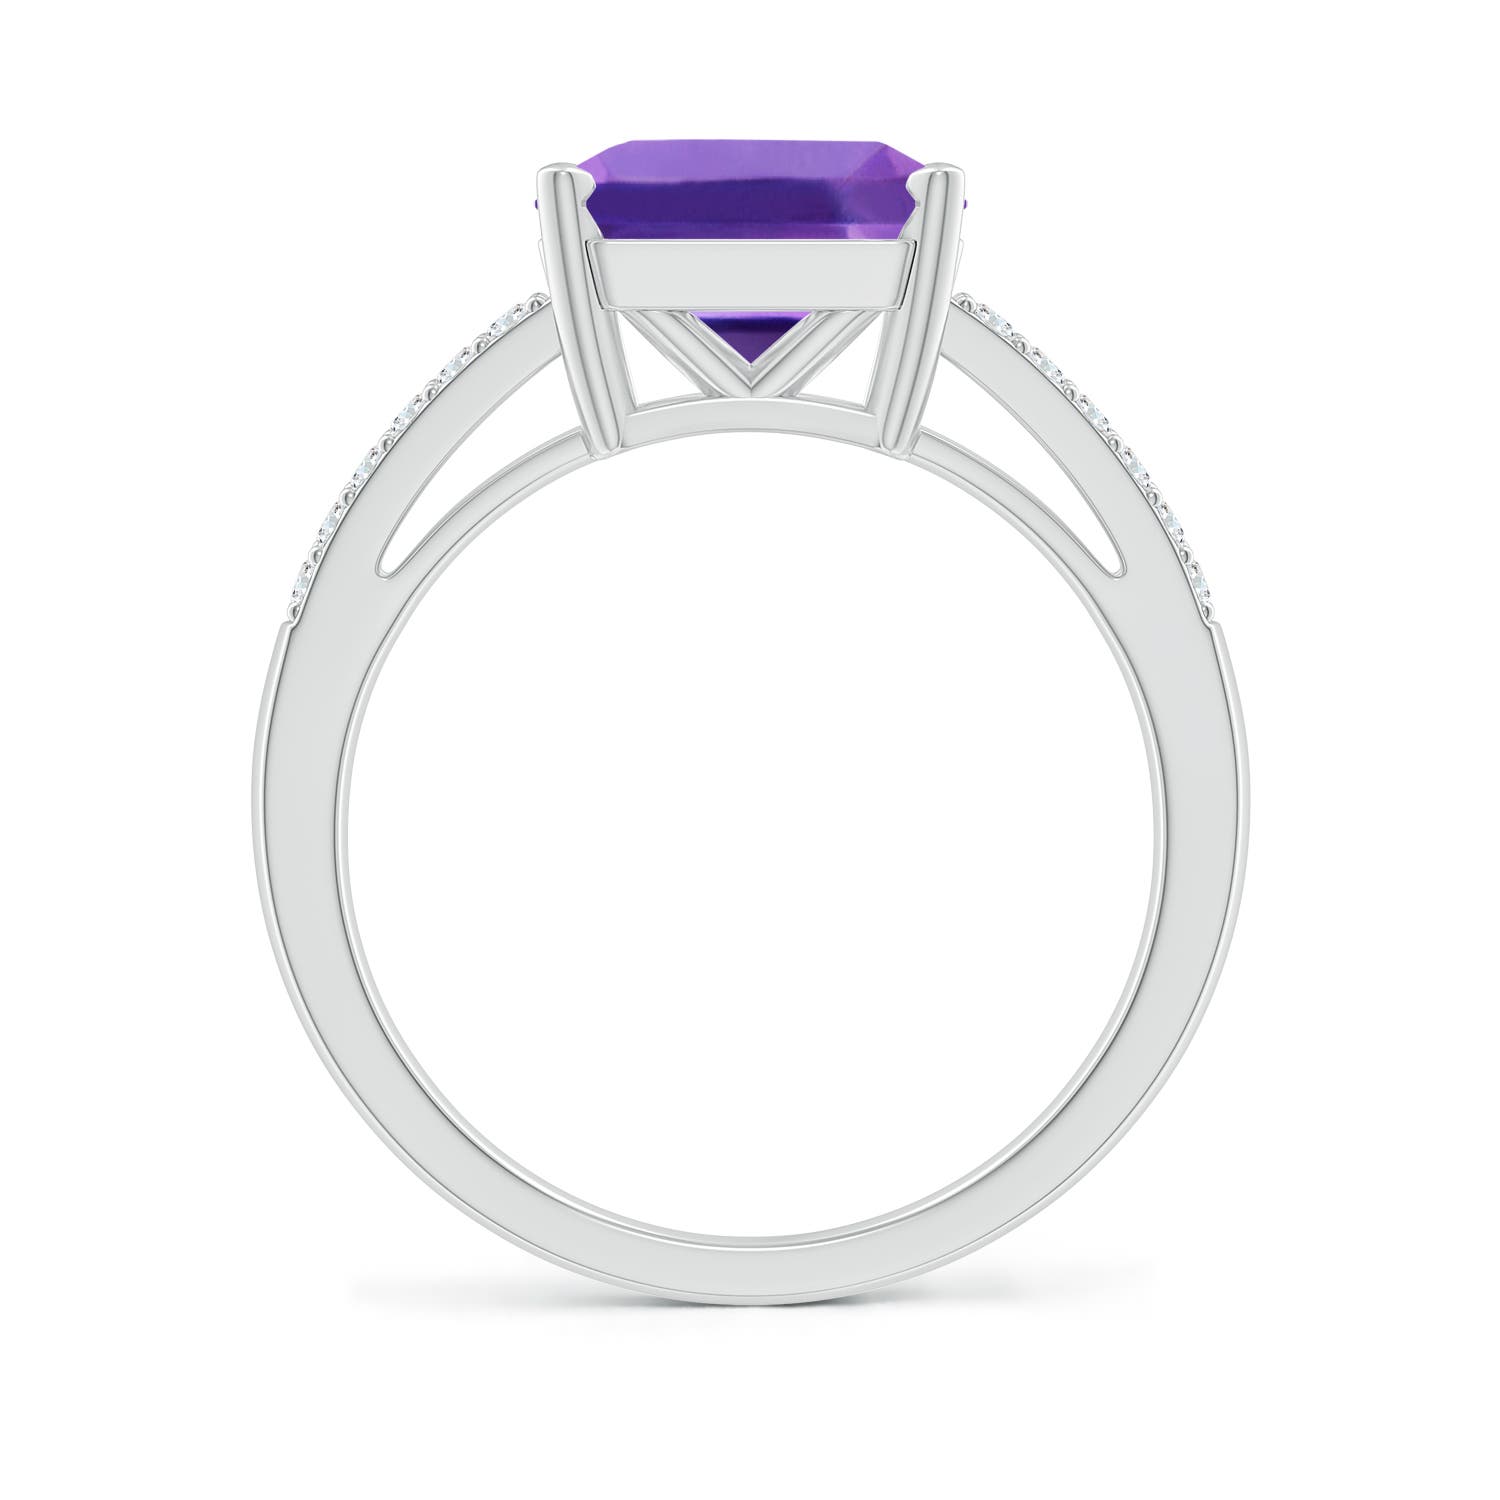 AAA - Amethyst / 3.04 CT / 14 KT White Gold